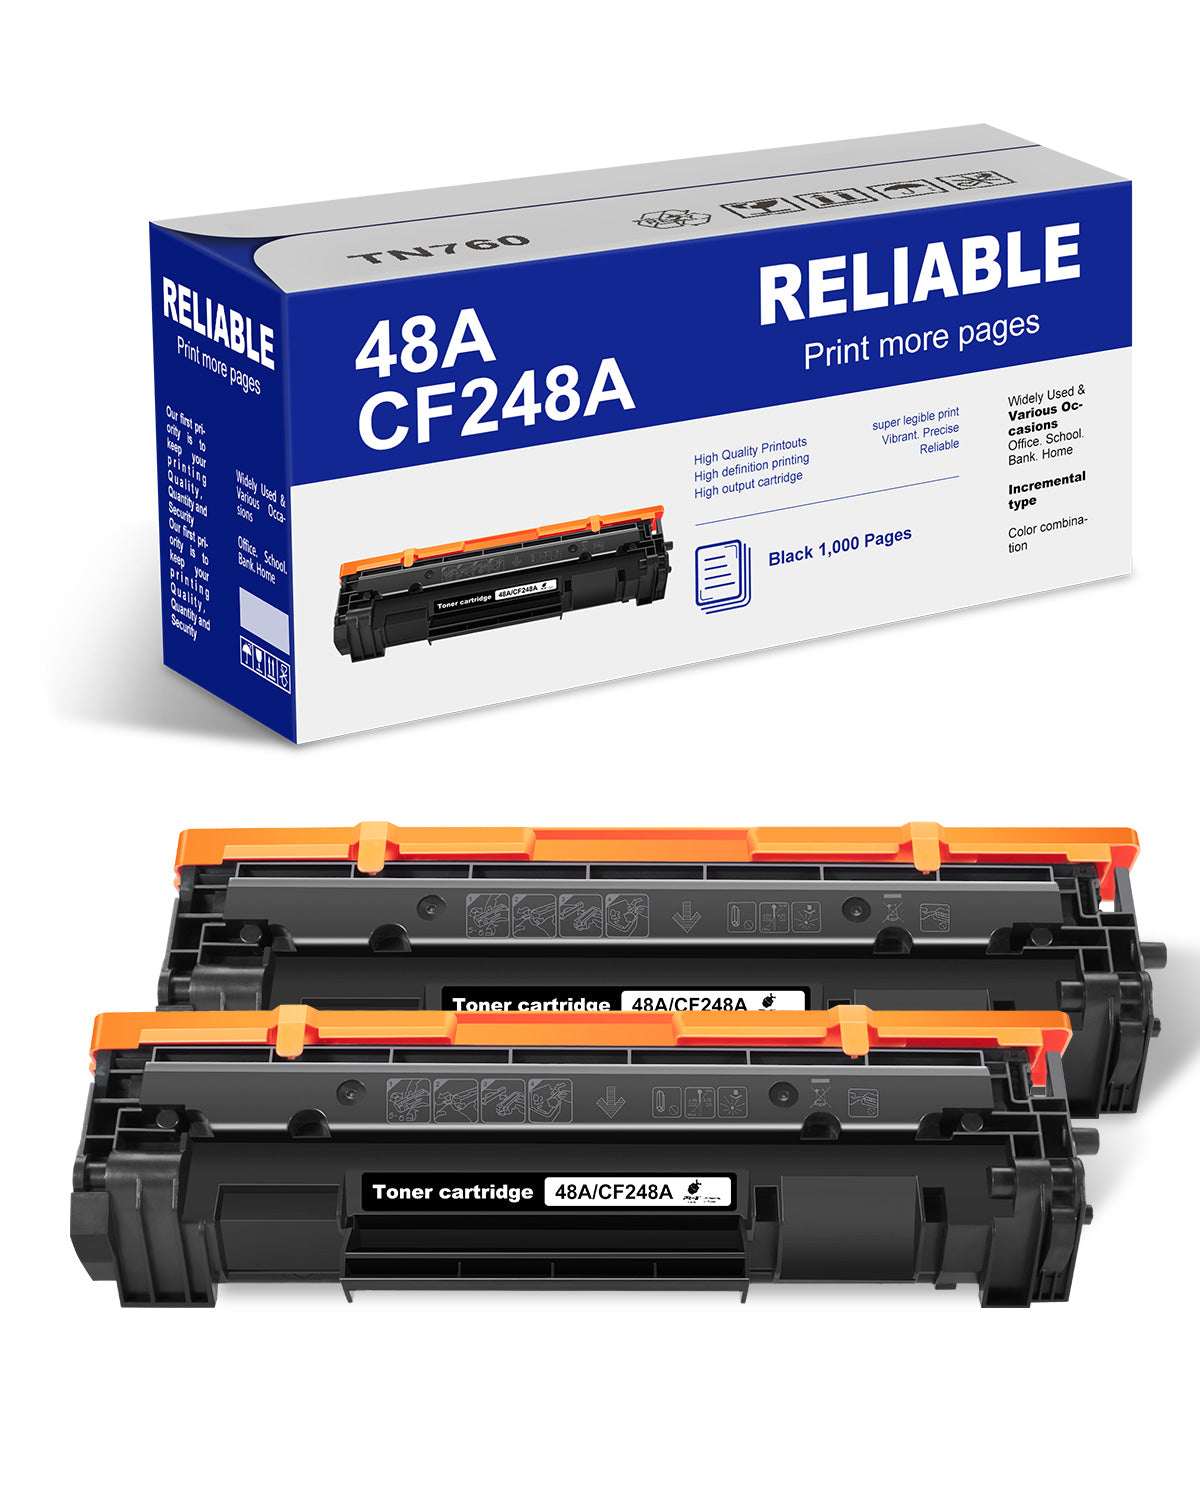 48A Toner Replacement for HP 48A Black Toner Cartridge Works wi –